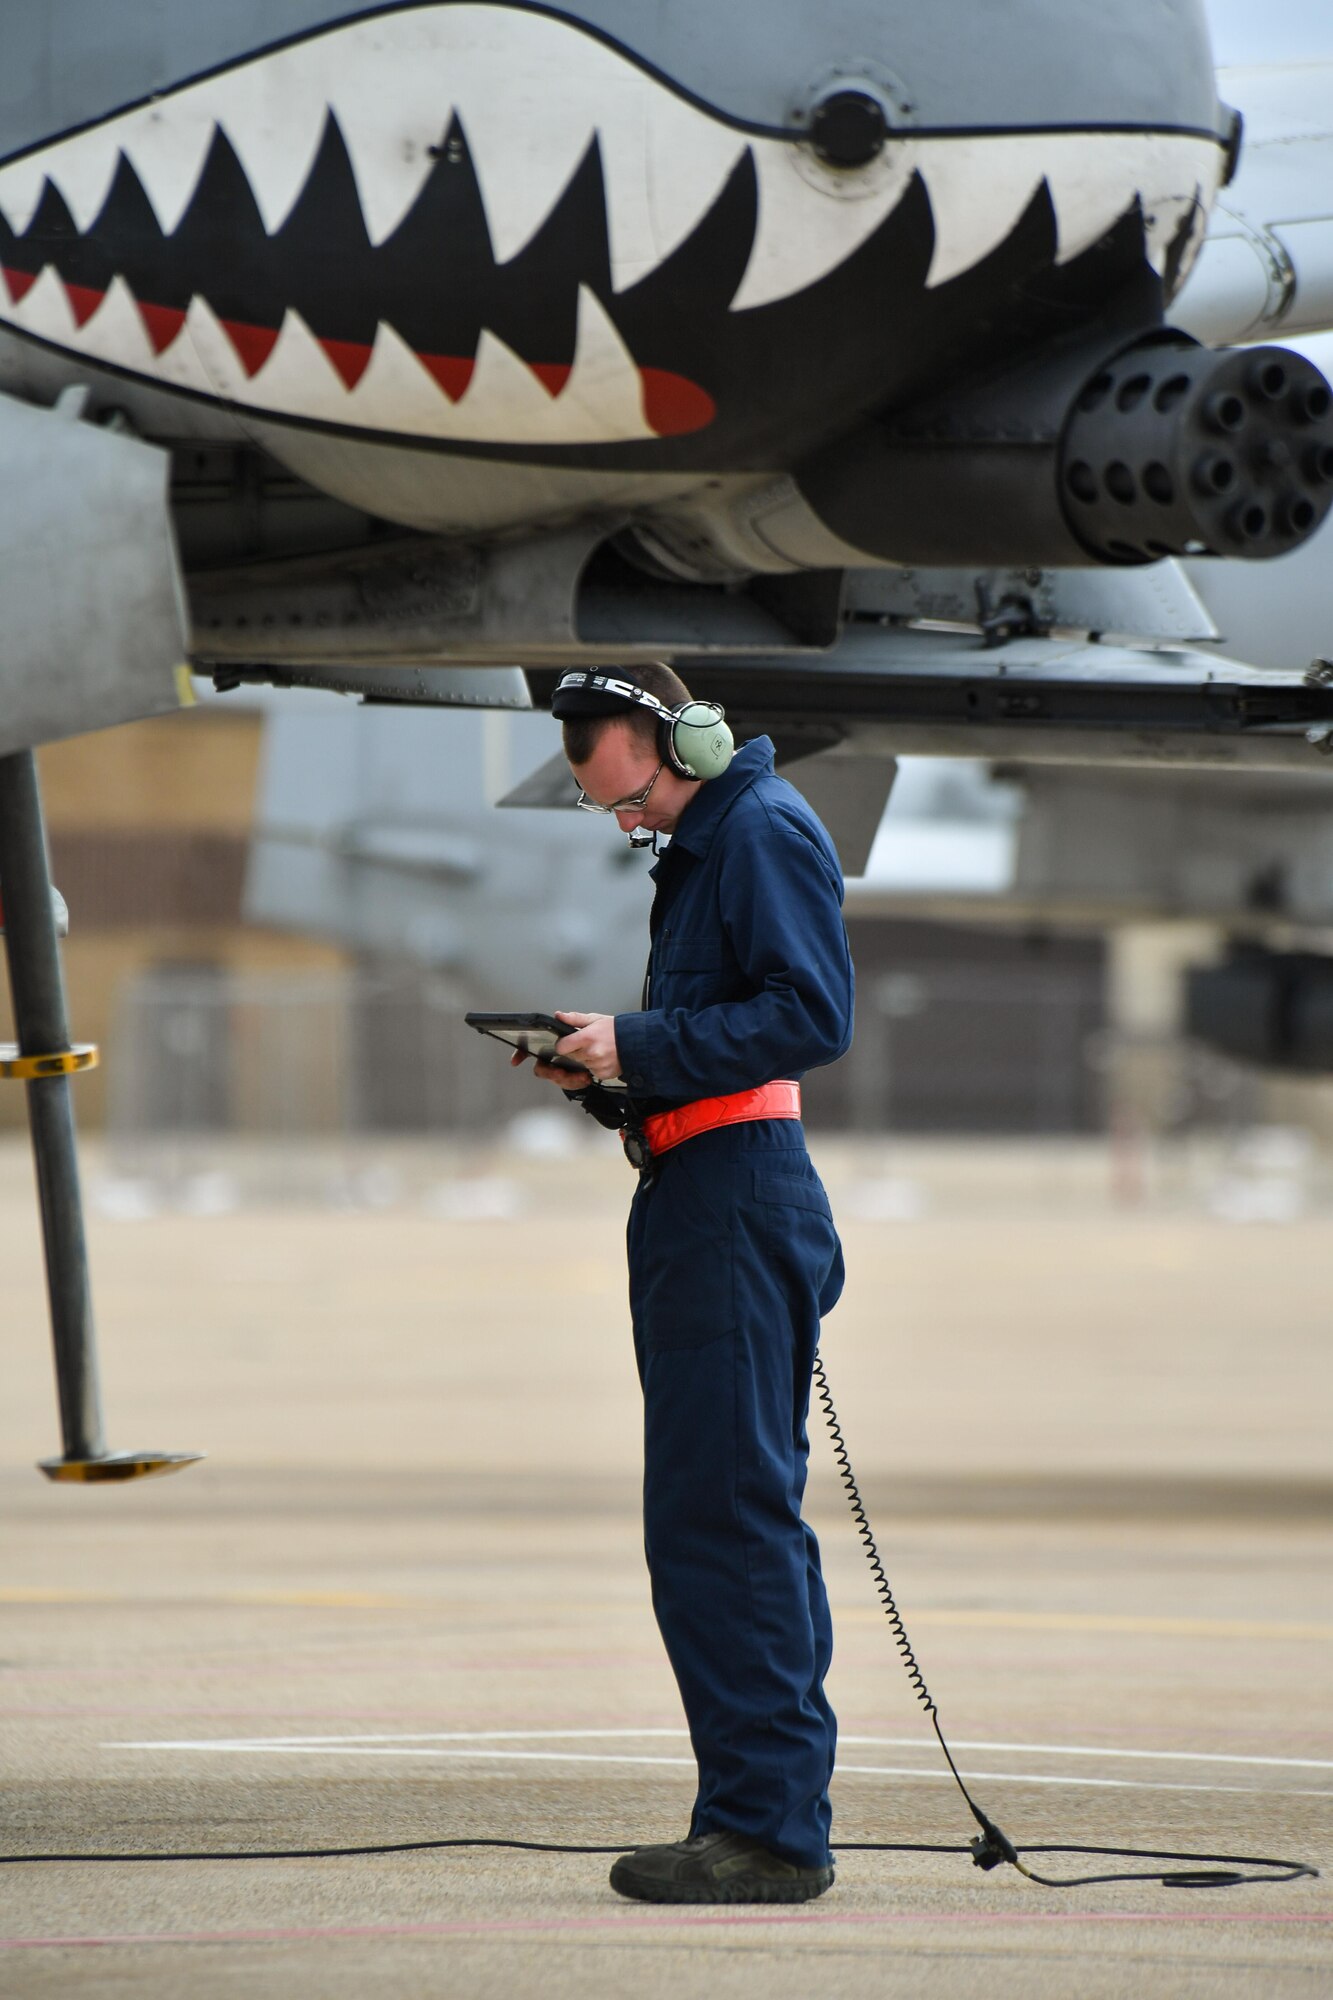 An A-10 Thunderbolt II crew chief assigned to the 23rd Aircraft Maintenance Squadron, Moody Air Force Base, Georgia, performs pre-flight checks May 2 at Hill AFB, Utah. Moody Airmen and aircraft were at Hill AFB participating in the precision-guided air-to-ground weapons evaluation exercise, Combat Hammer. (U.S. Air Force/R. Nial Bradshaw)